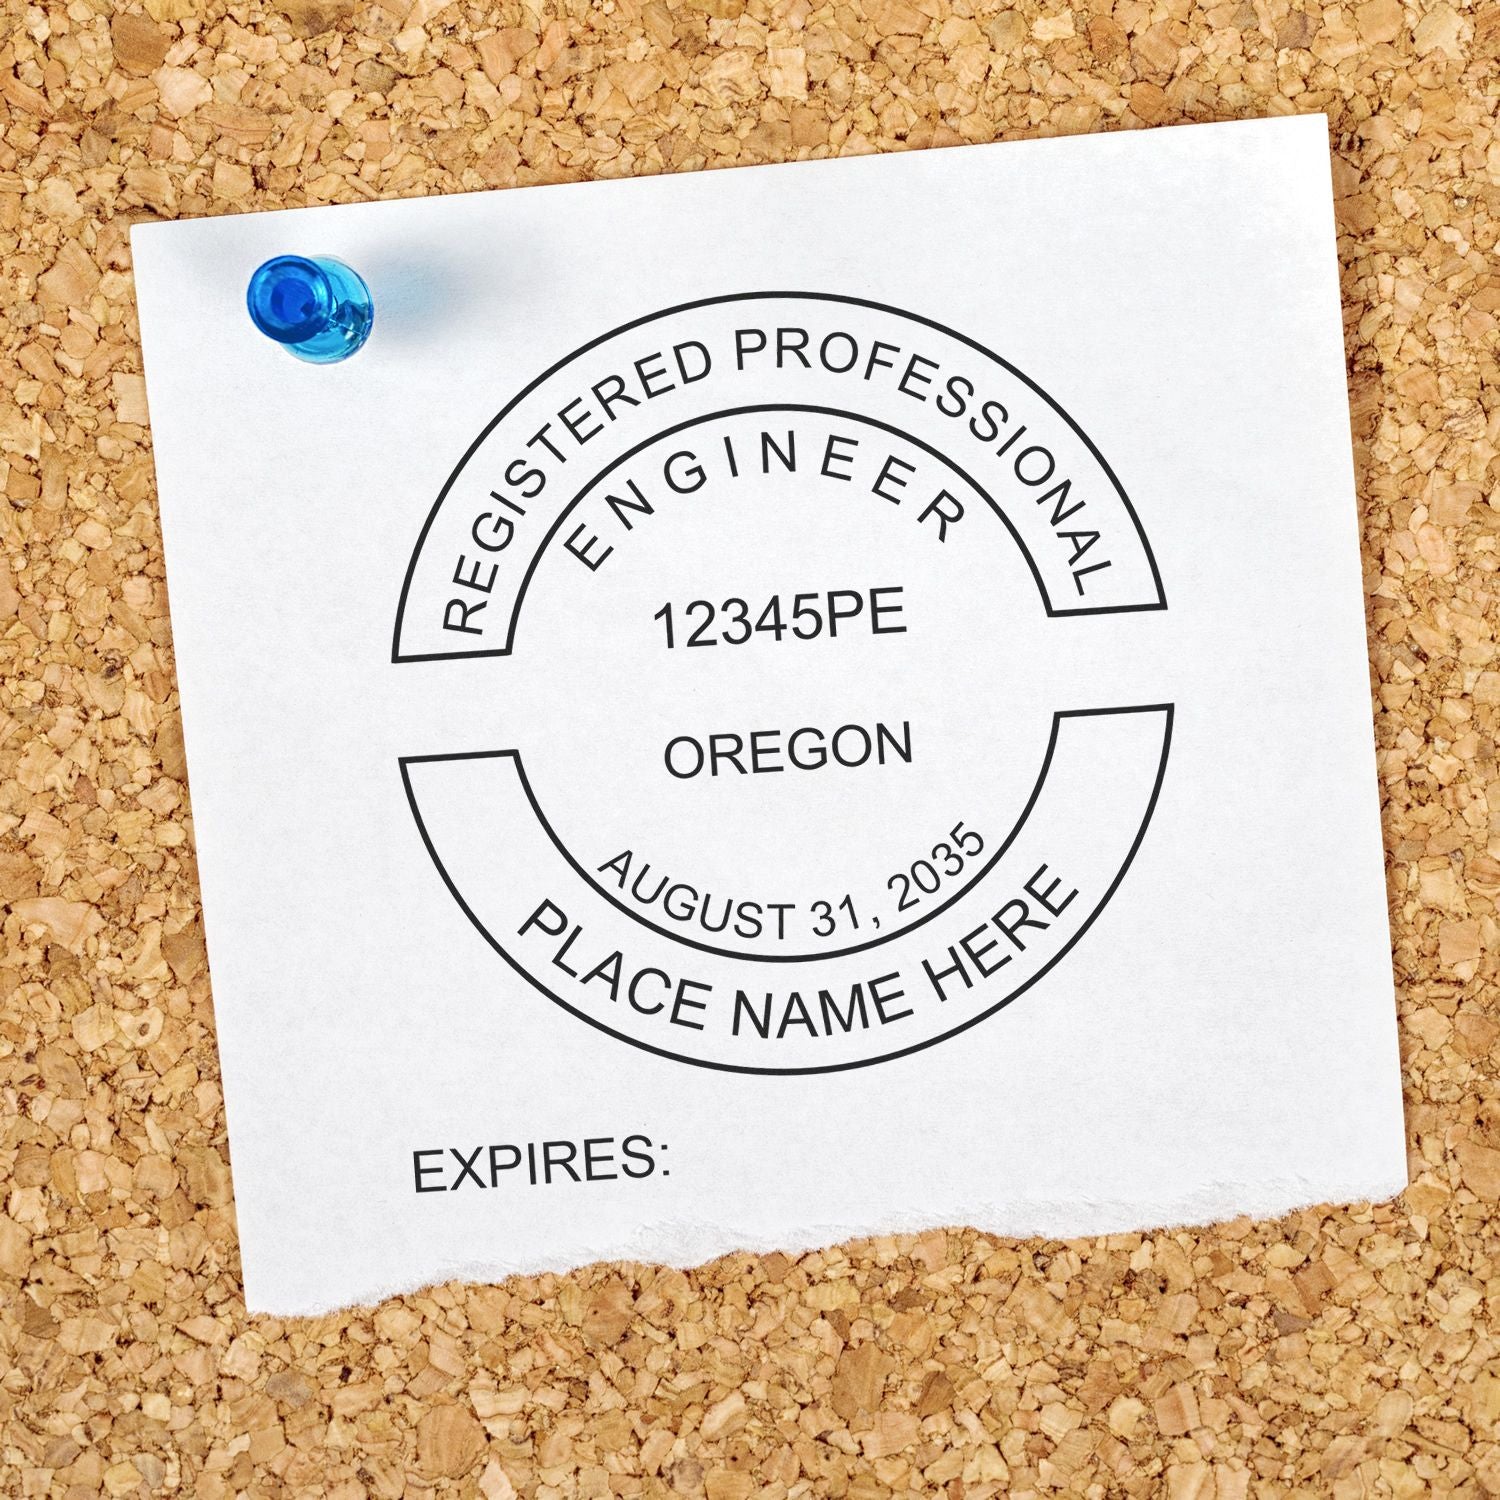 Another Example of a stamped impression of the Oregon Professional Engineer Seal Stamp on a piece of office paper.